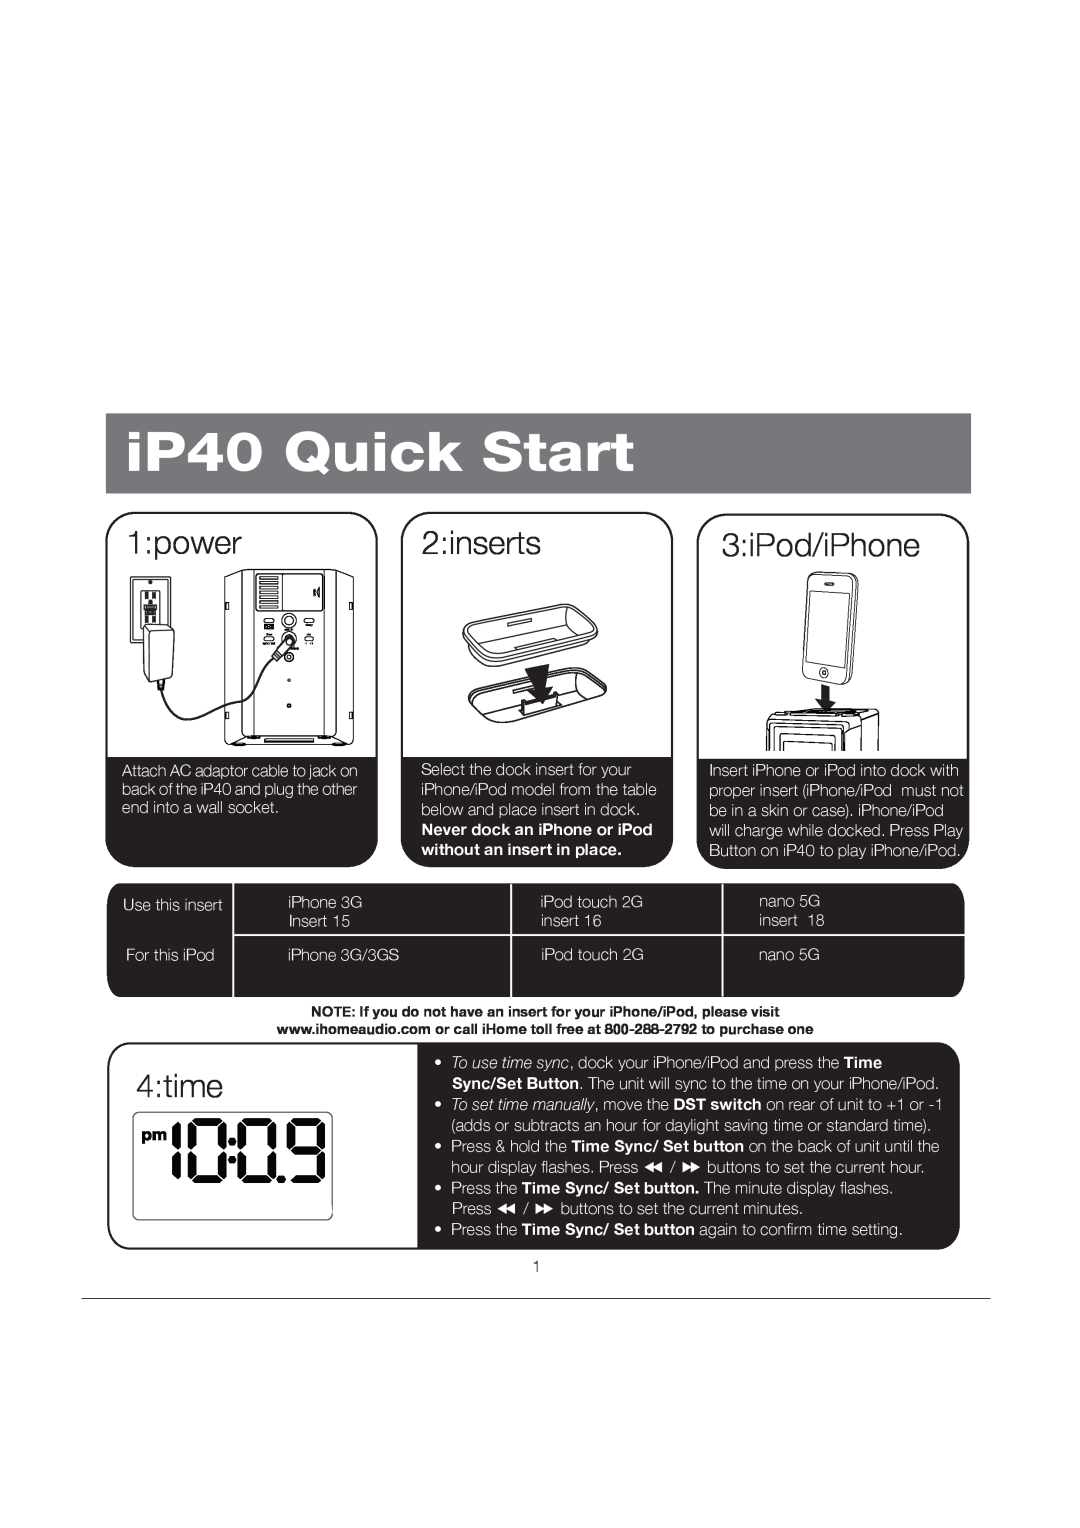 iHome iP40 Quick Start, 1power2inserts3iPod/iPhone, 4time, Never dock an iPhone or iPod without an insert in place 